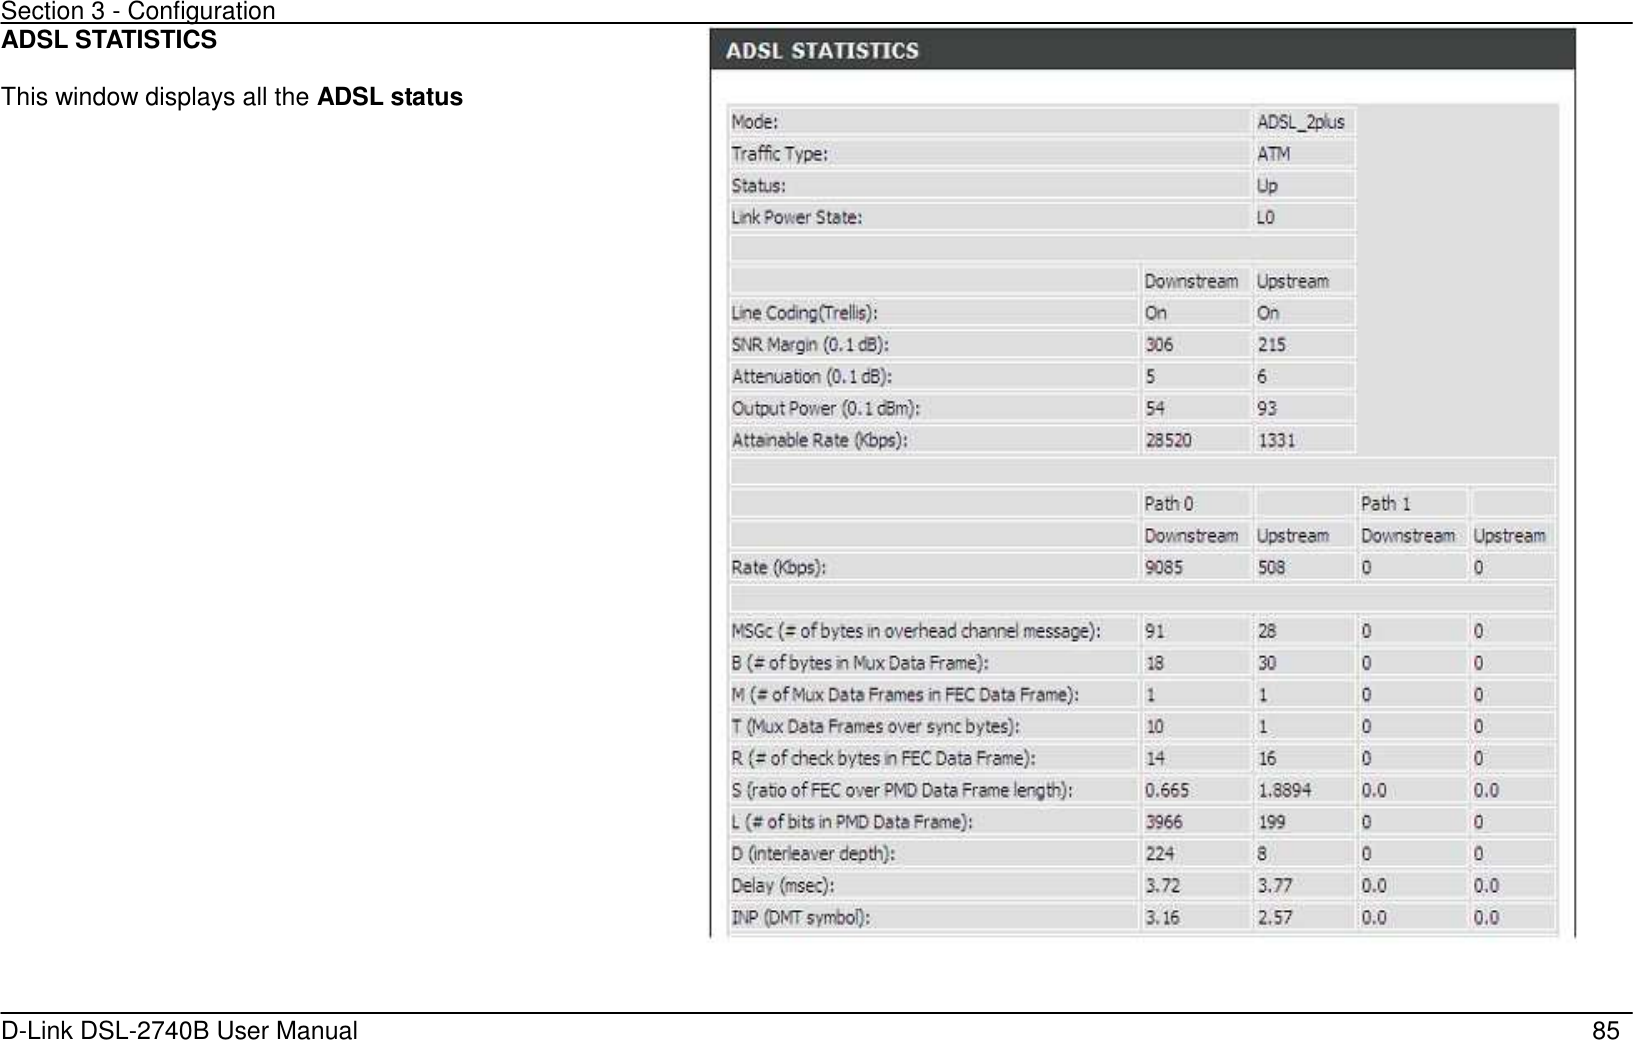 Section 3 - Configuration   D-Link DSL-2740B User Manual                                                  85 ADSL STATISTICS  This window displays all the ADSL status                                   